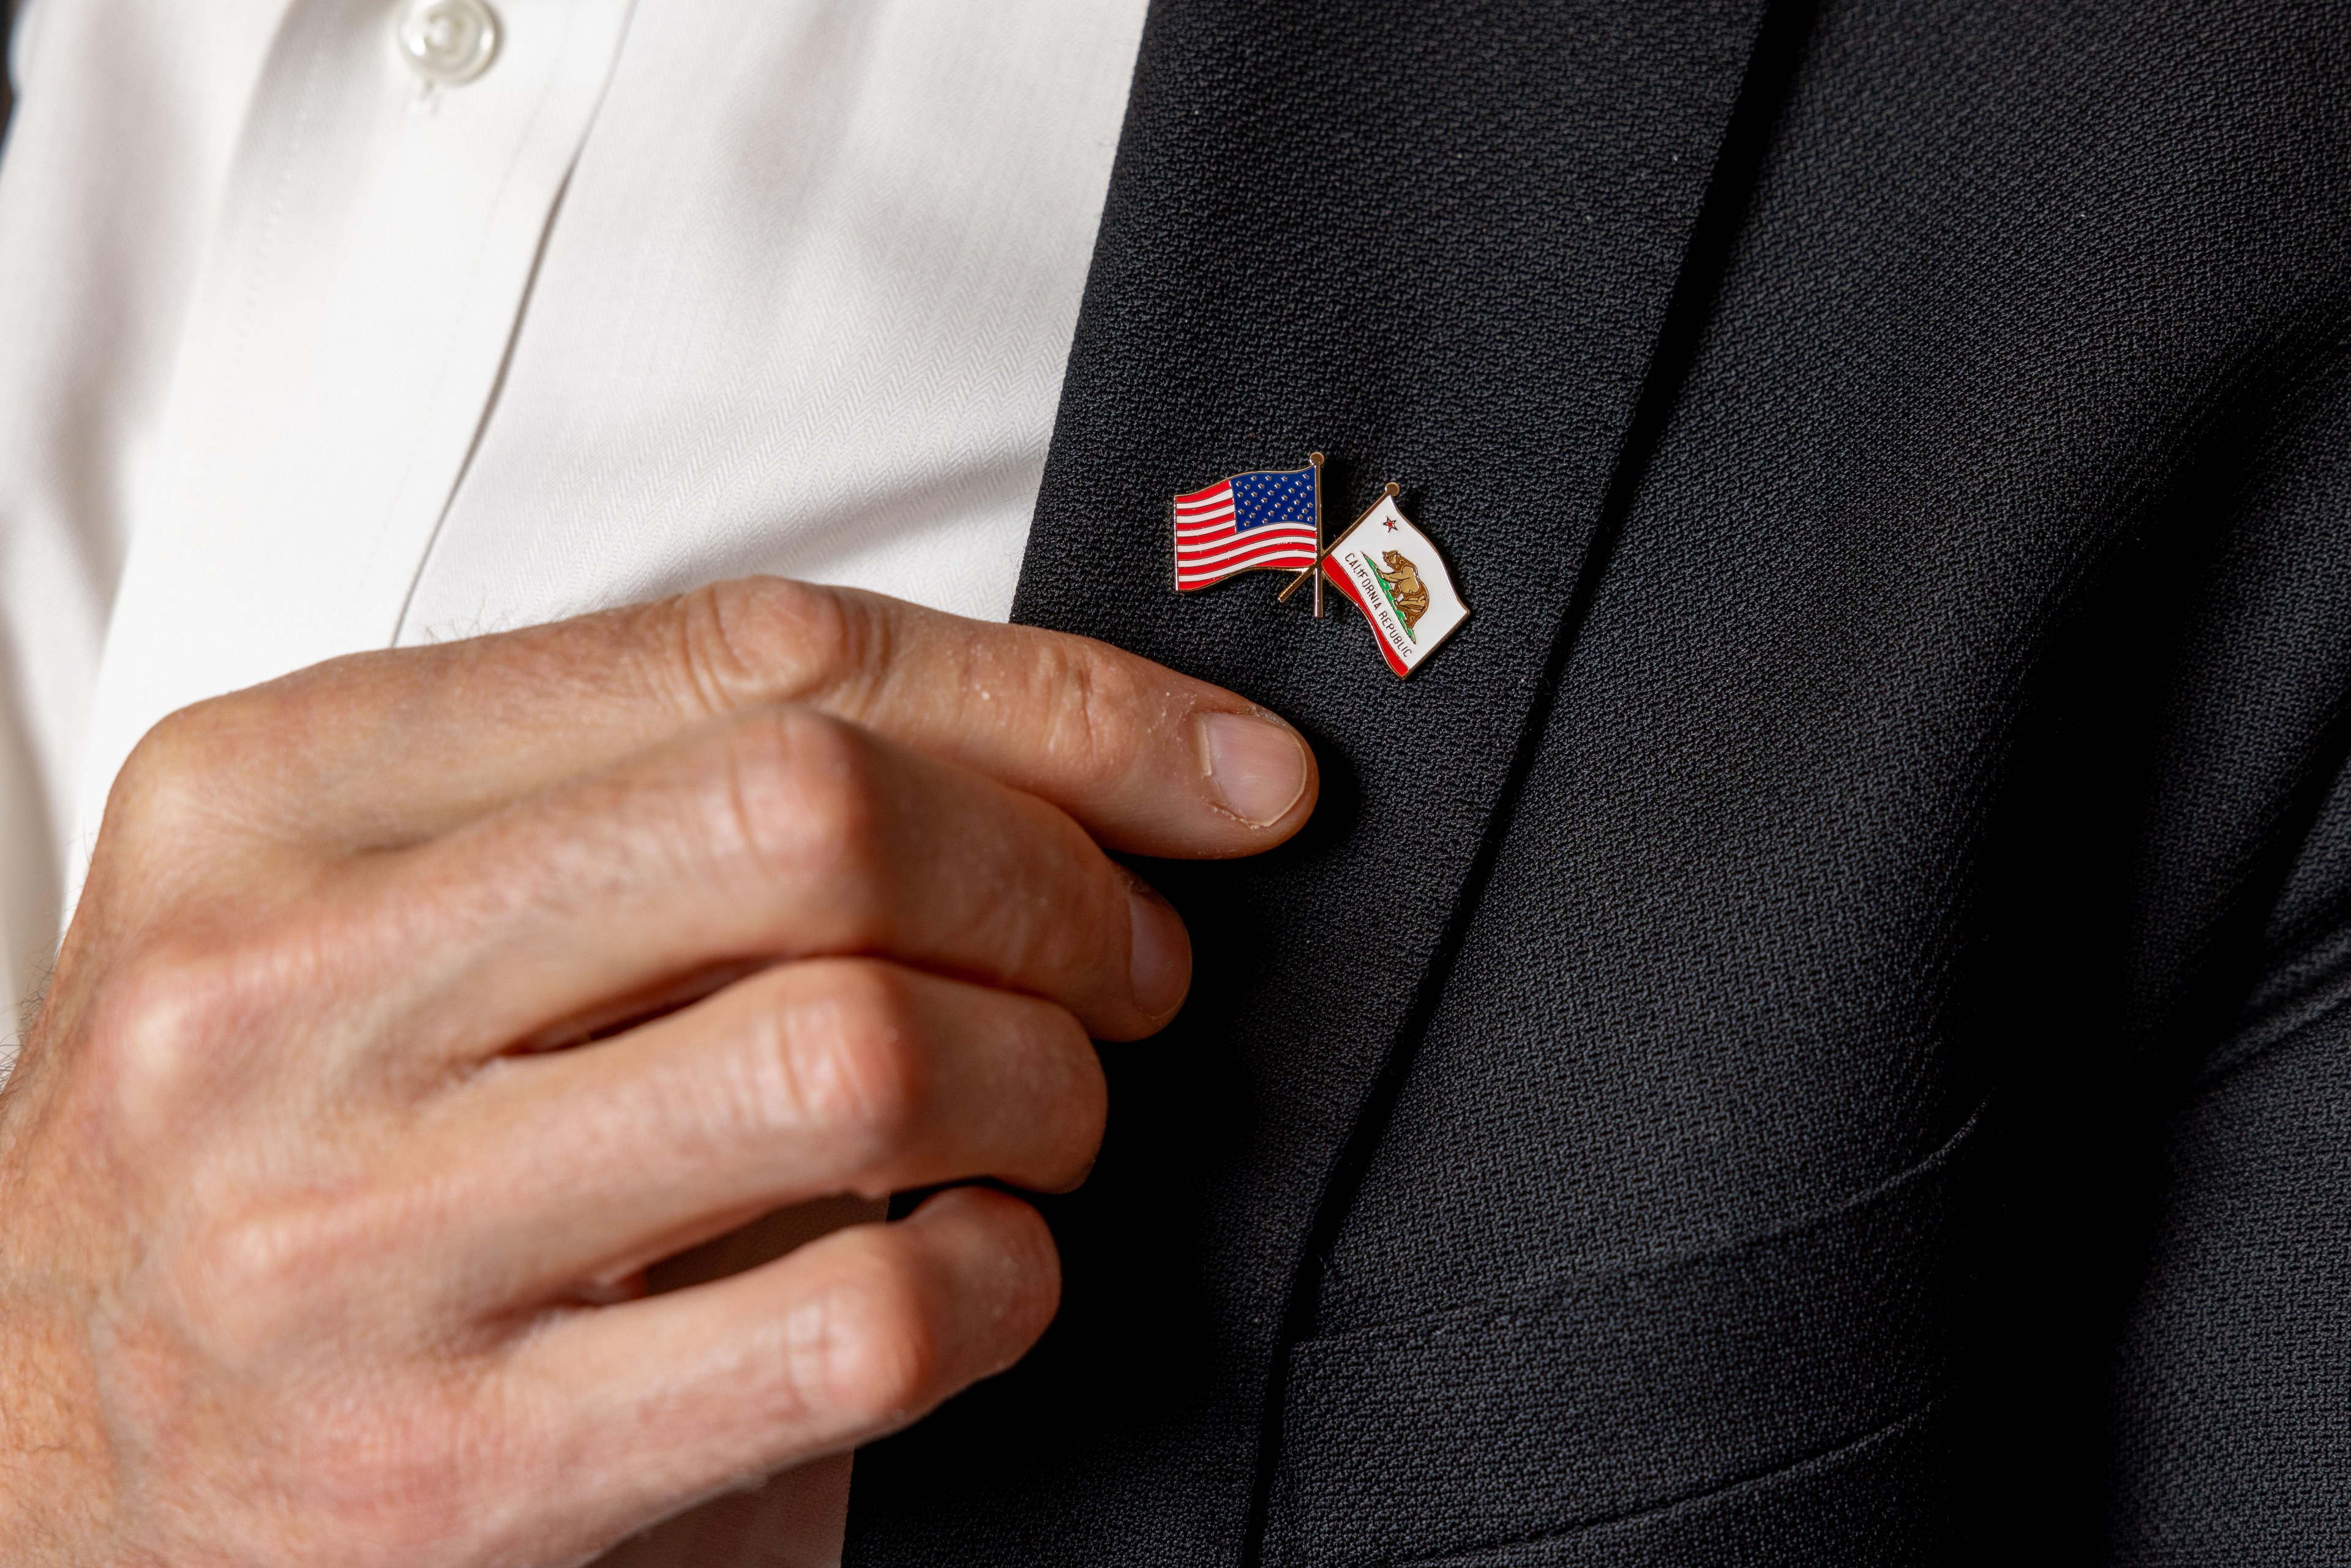 A hand is adjusting a lapel pin that features crossed American and Californian flags, attached to a dark-colored blazer worn over a white shirt.